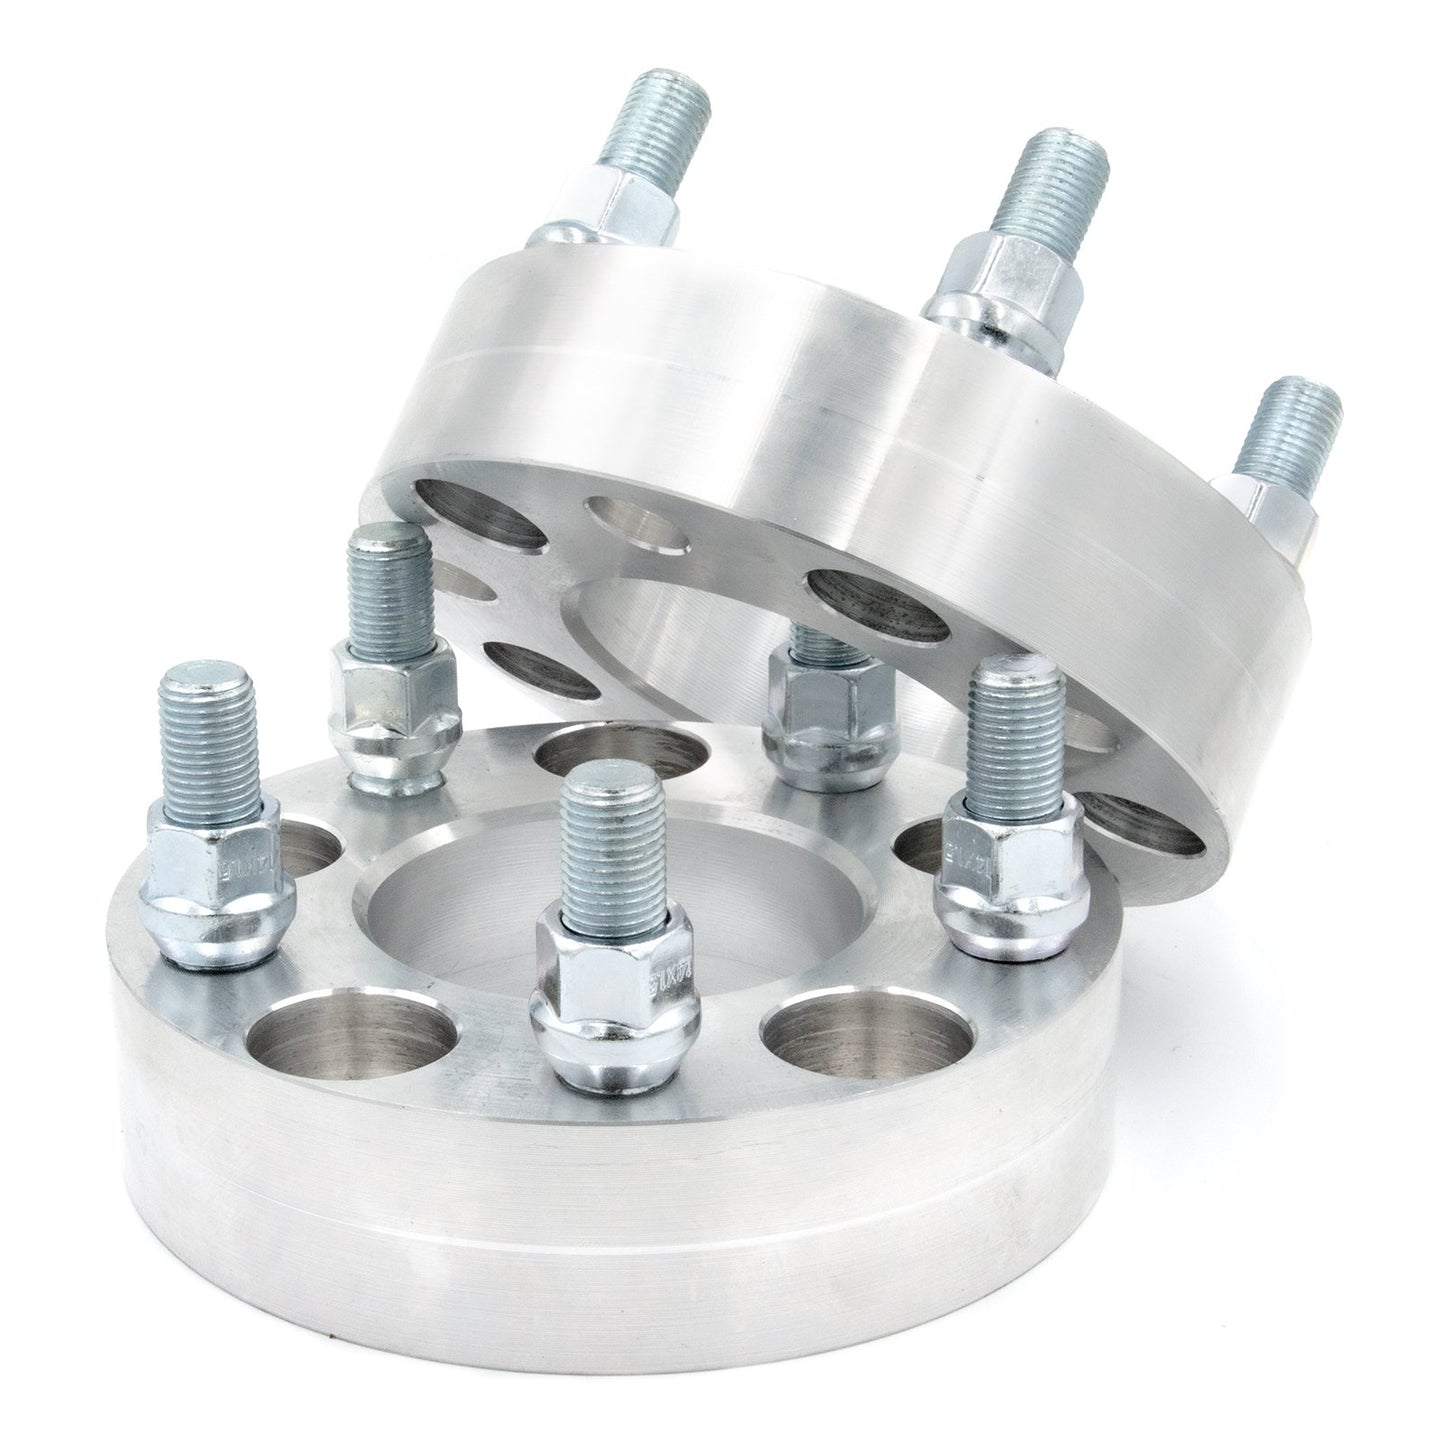 5x130 to 5x112 Wheel Spacer/Adapter - Thickness: 3/4"- 4"